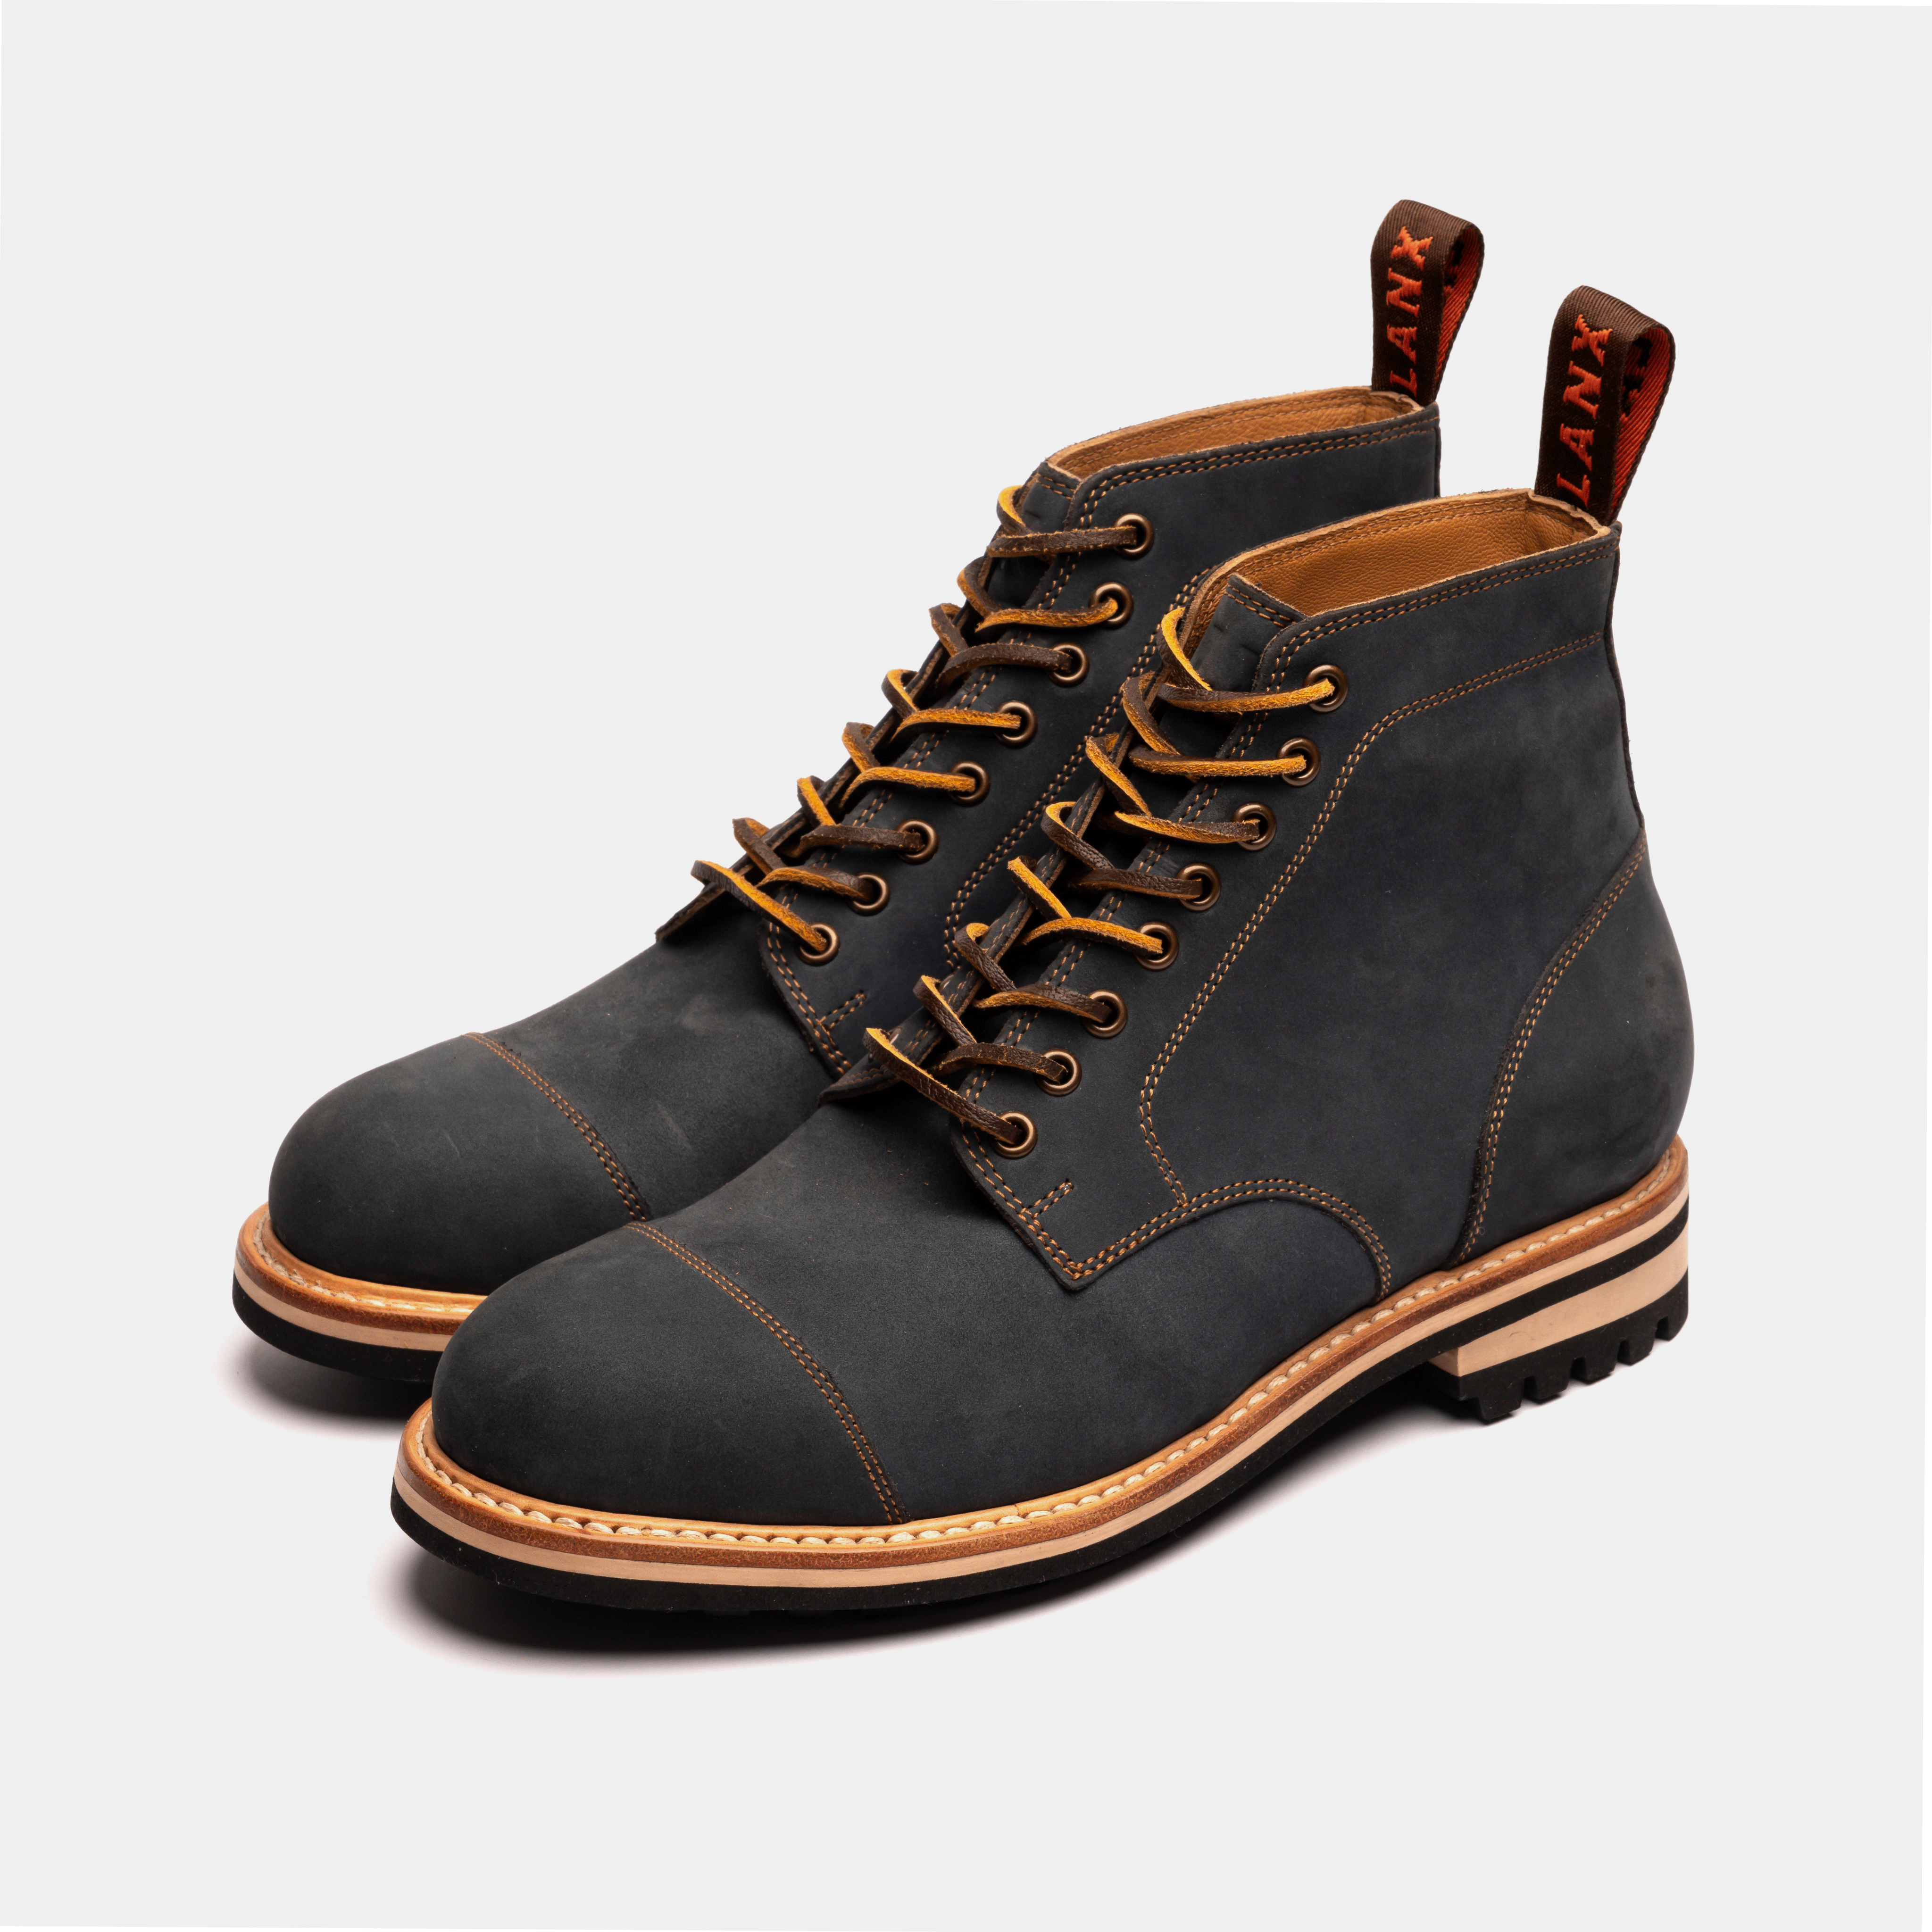 VIBERG BOOT Lace To Toe Oxford 8 1/2-